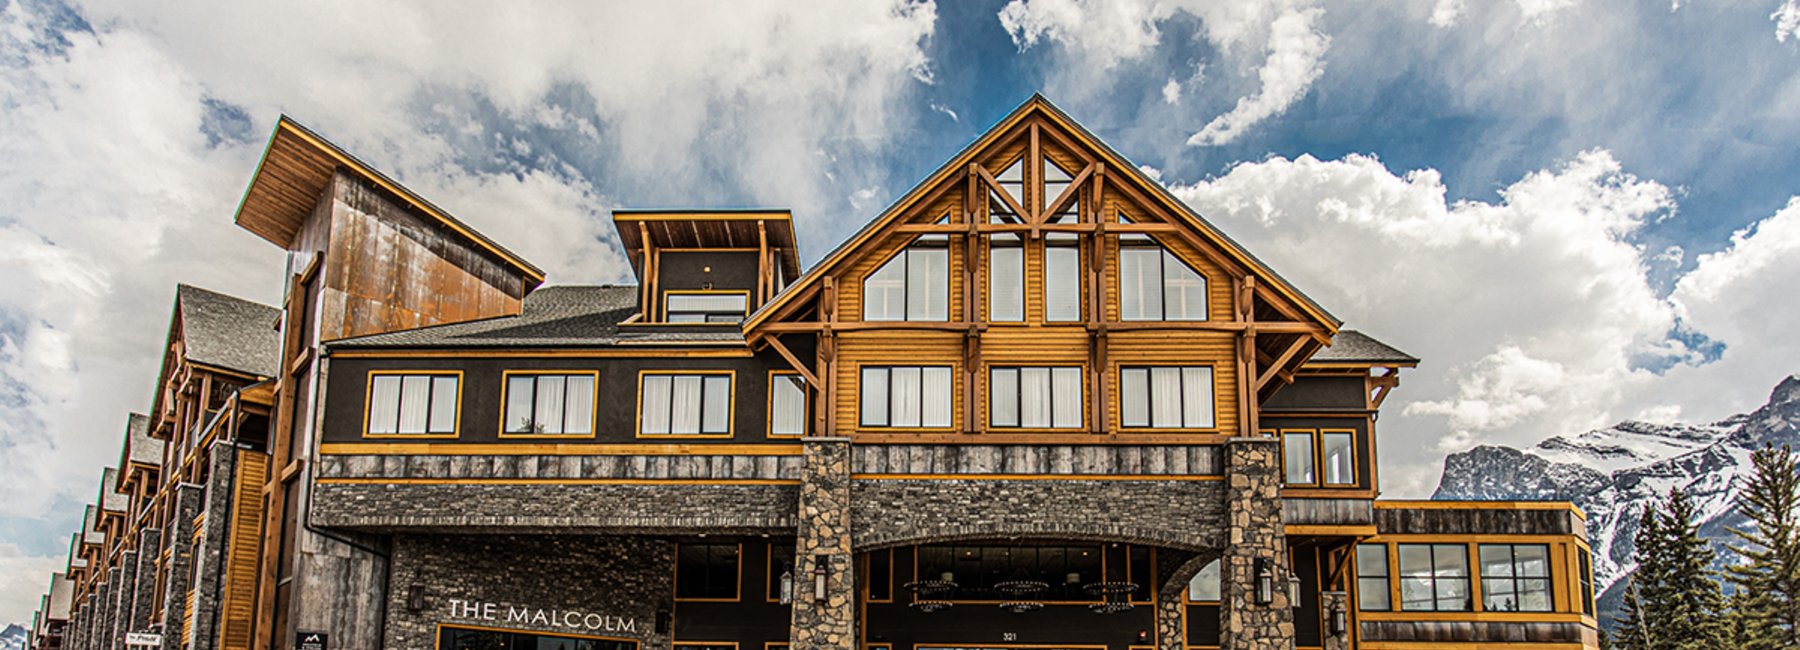 malcolm hotel canmore